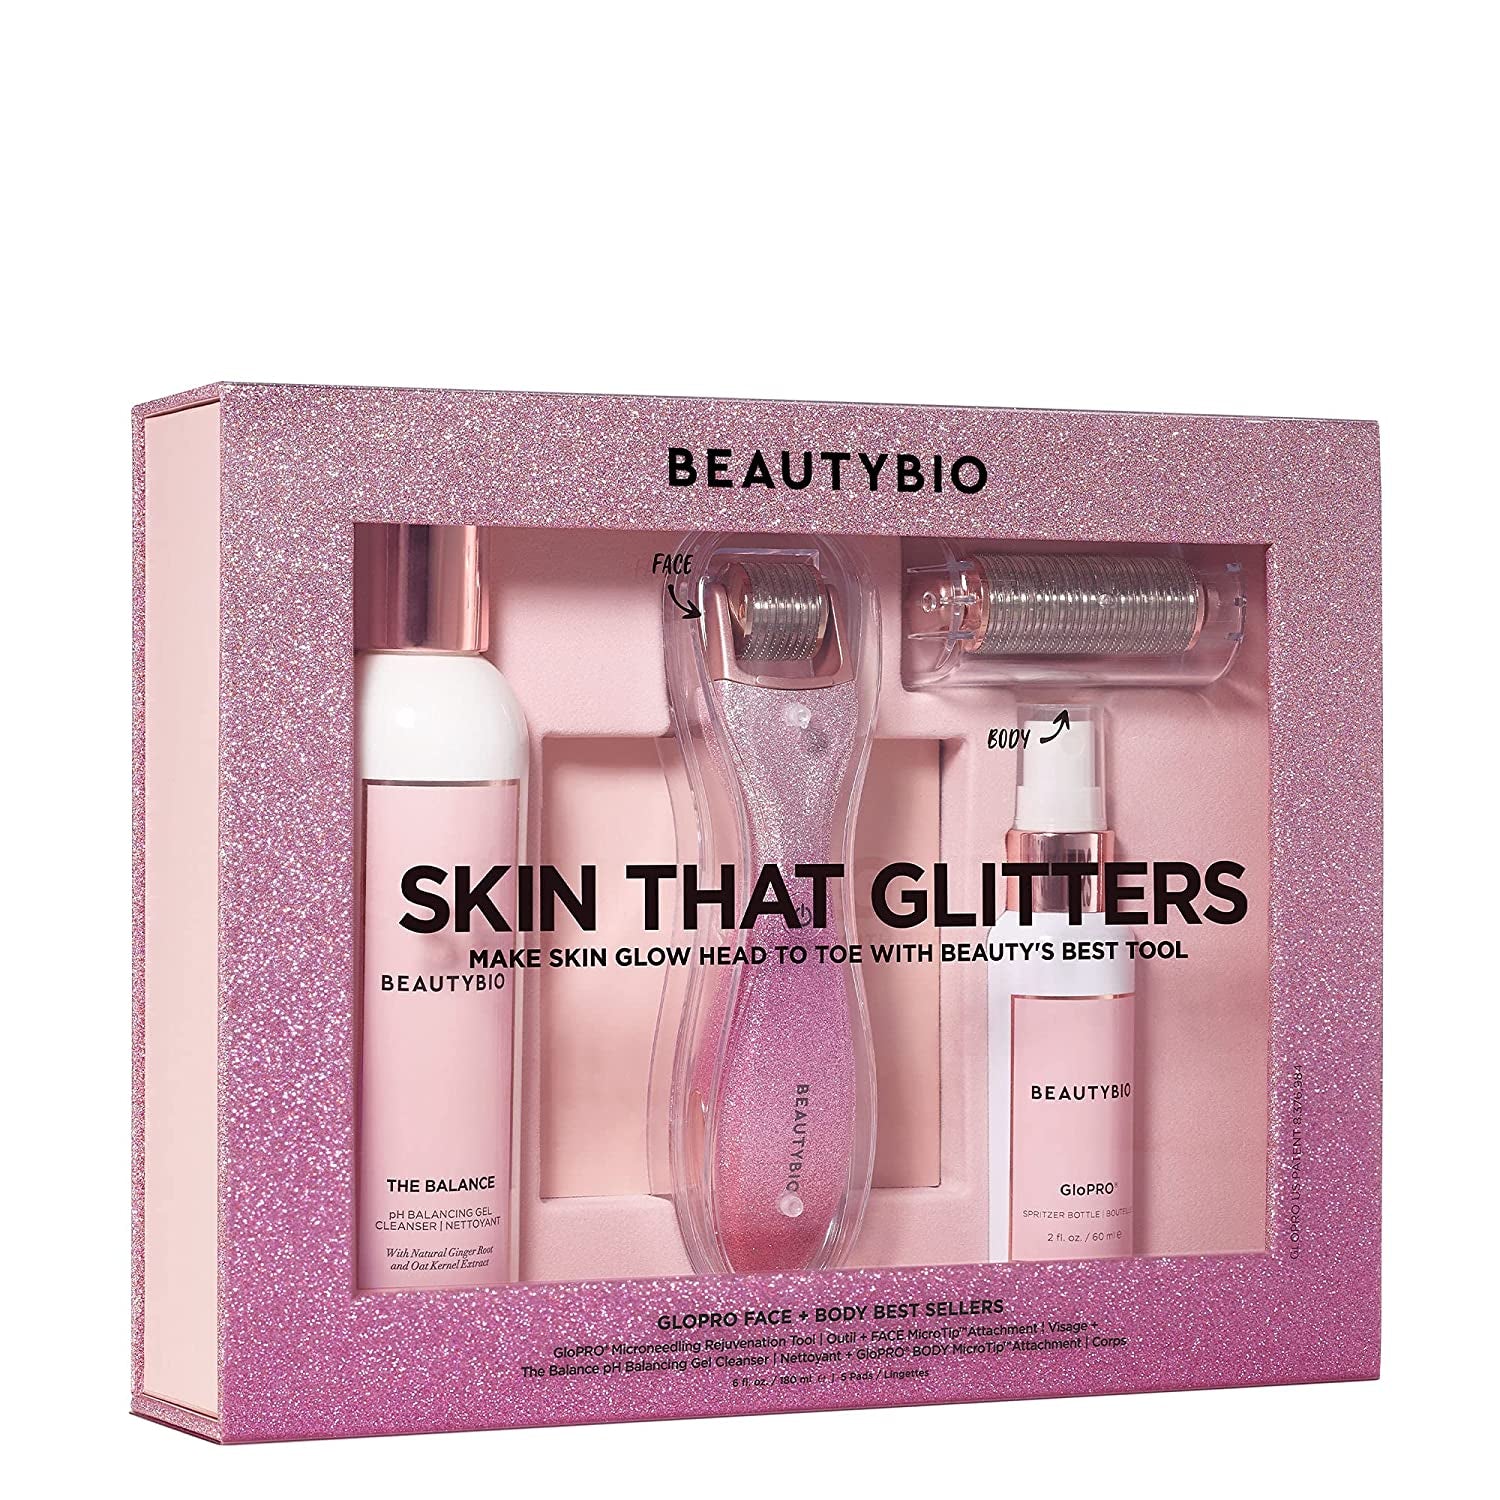 Beautybio Skin That Glitters. Glopro Tool, Face and Body Attachment Heads, the Balance and 5 Prep Pads, 1 Ct.